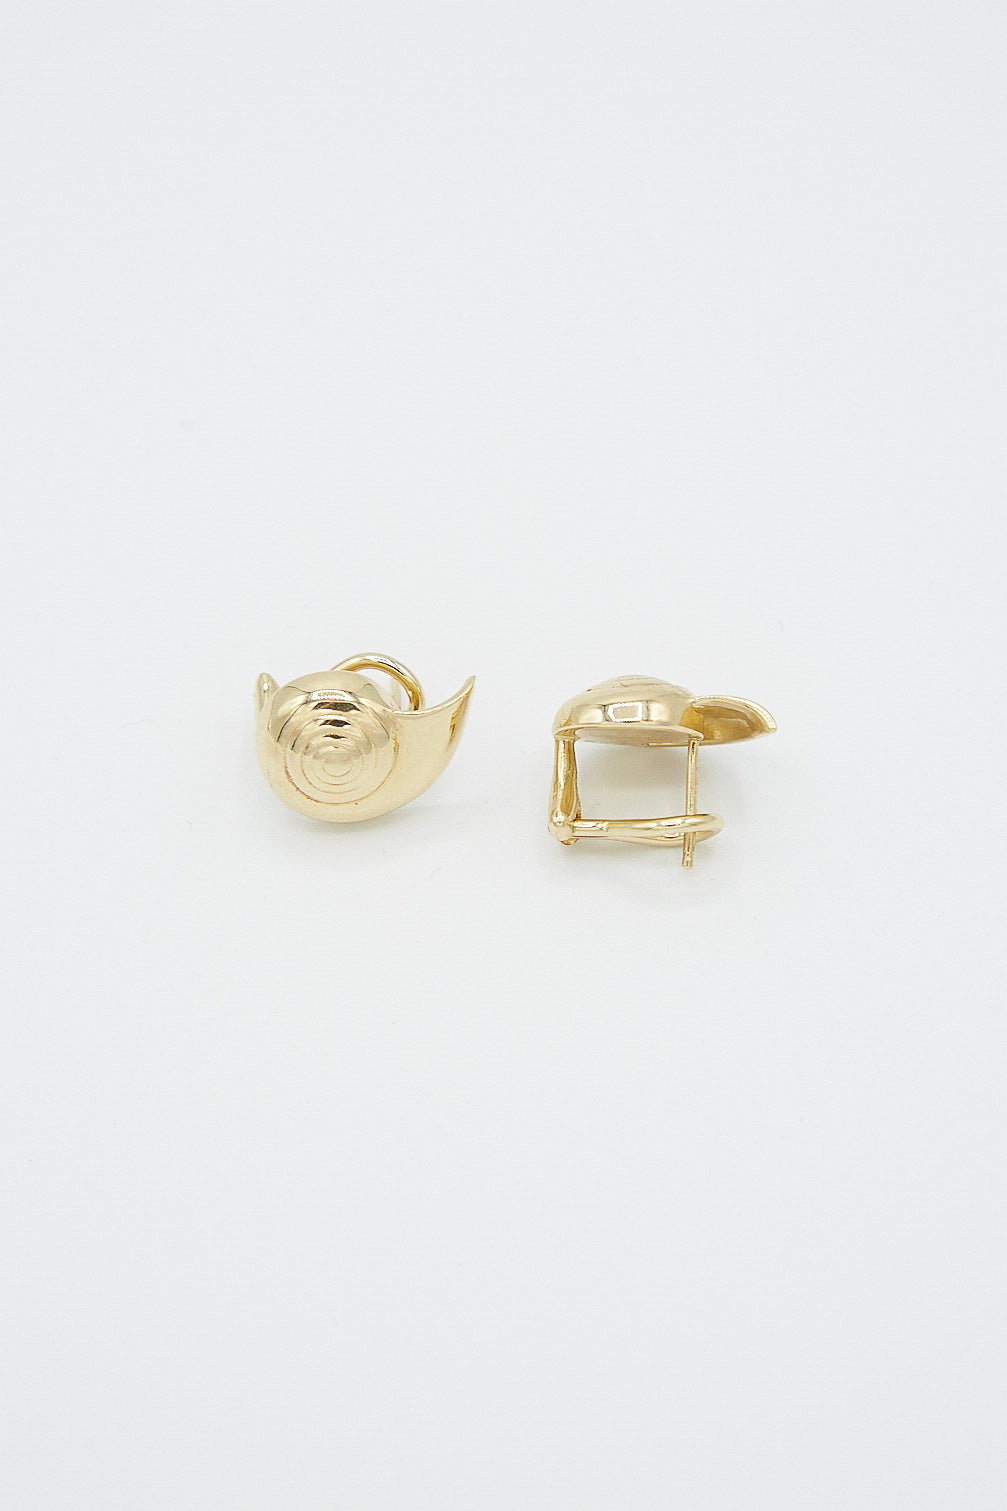 A pair of Large Nautilus Earrings by Kathryn Bentley, made of 14k yellow gold plated Nautilus shell, on a white background, handmade in Los Angeles.